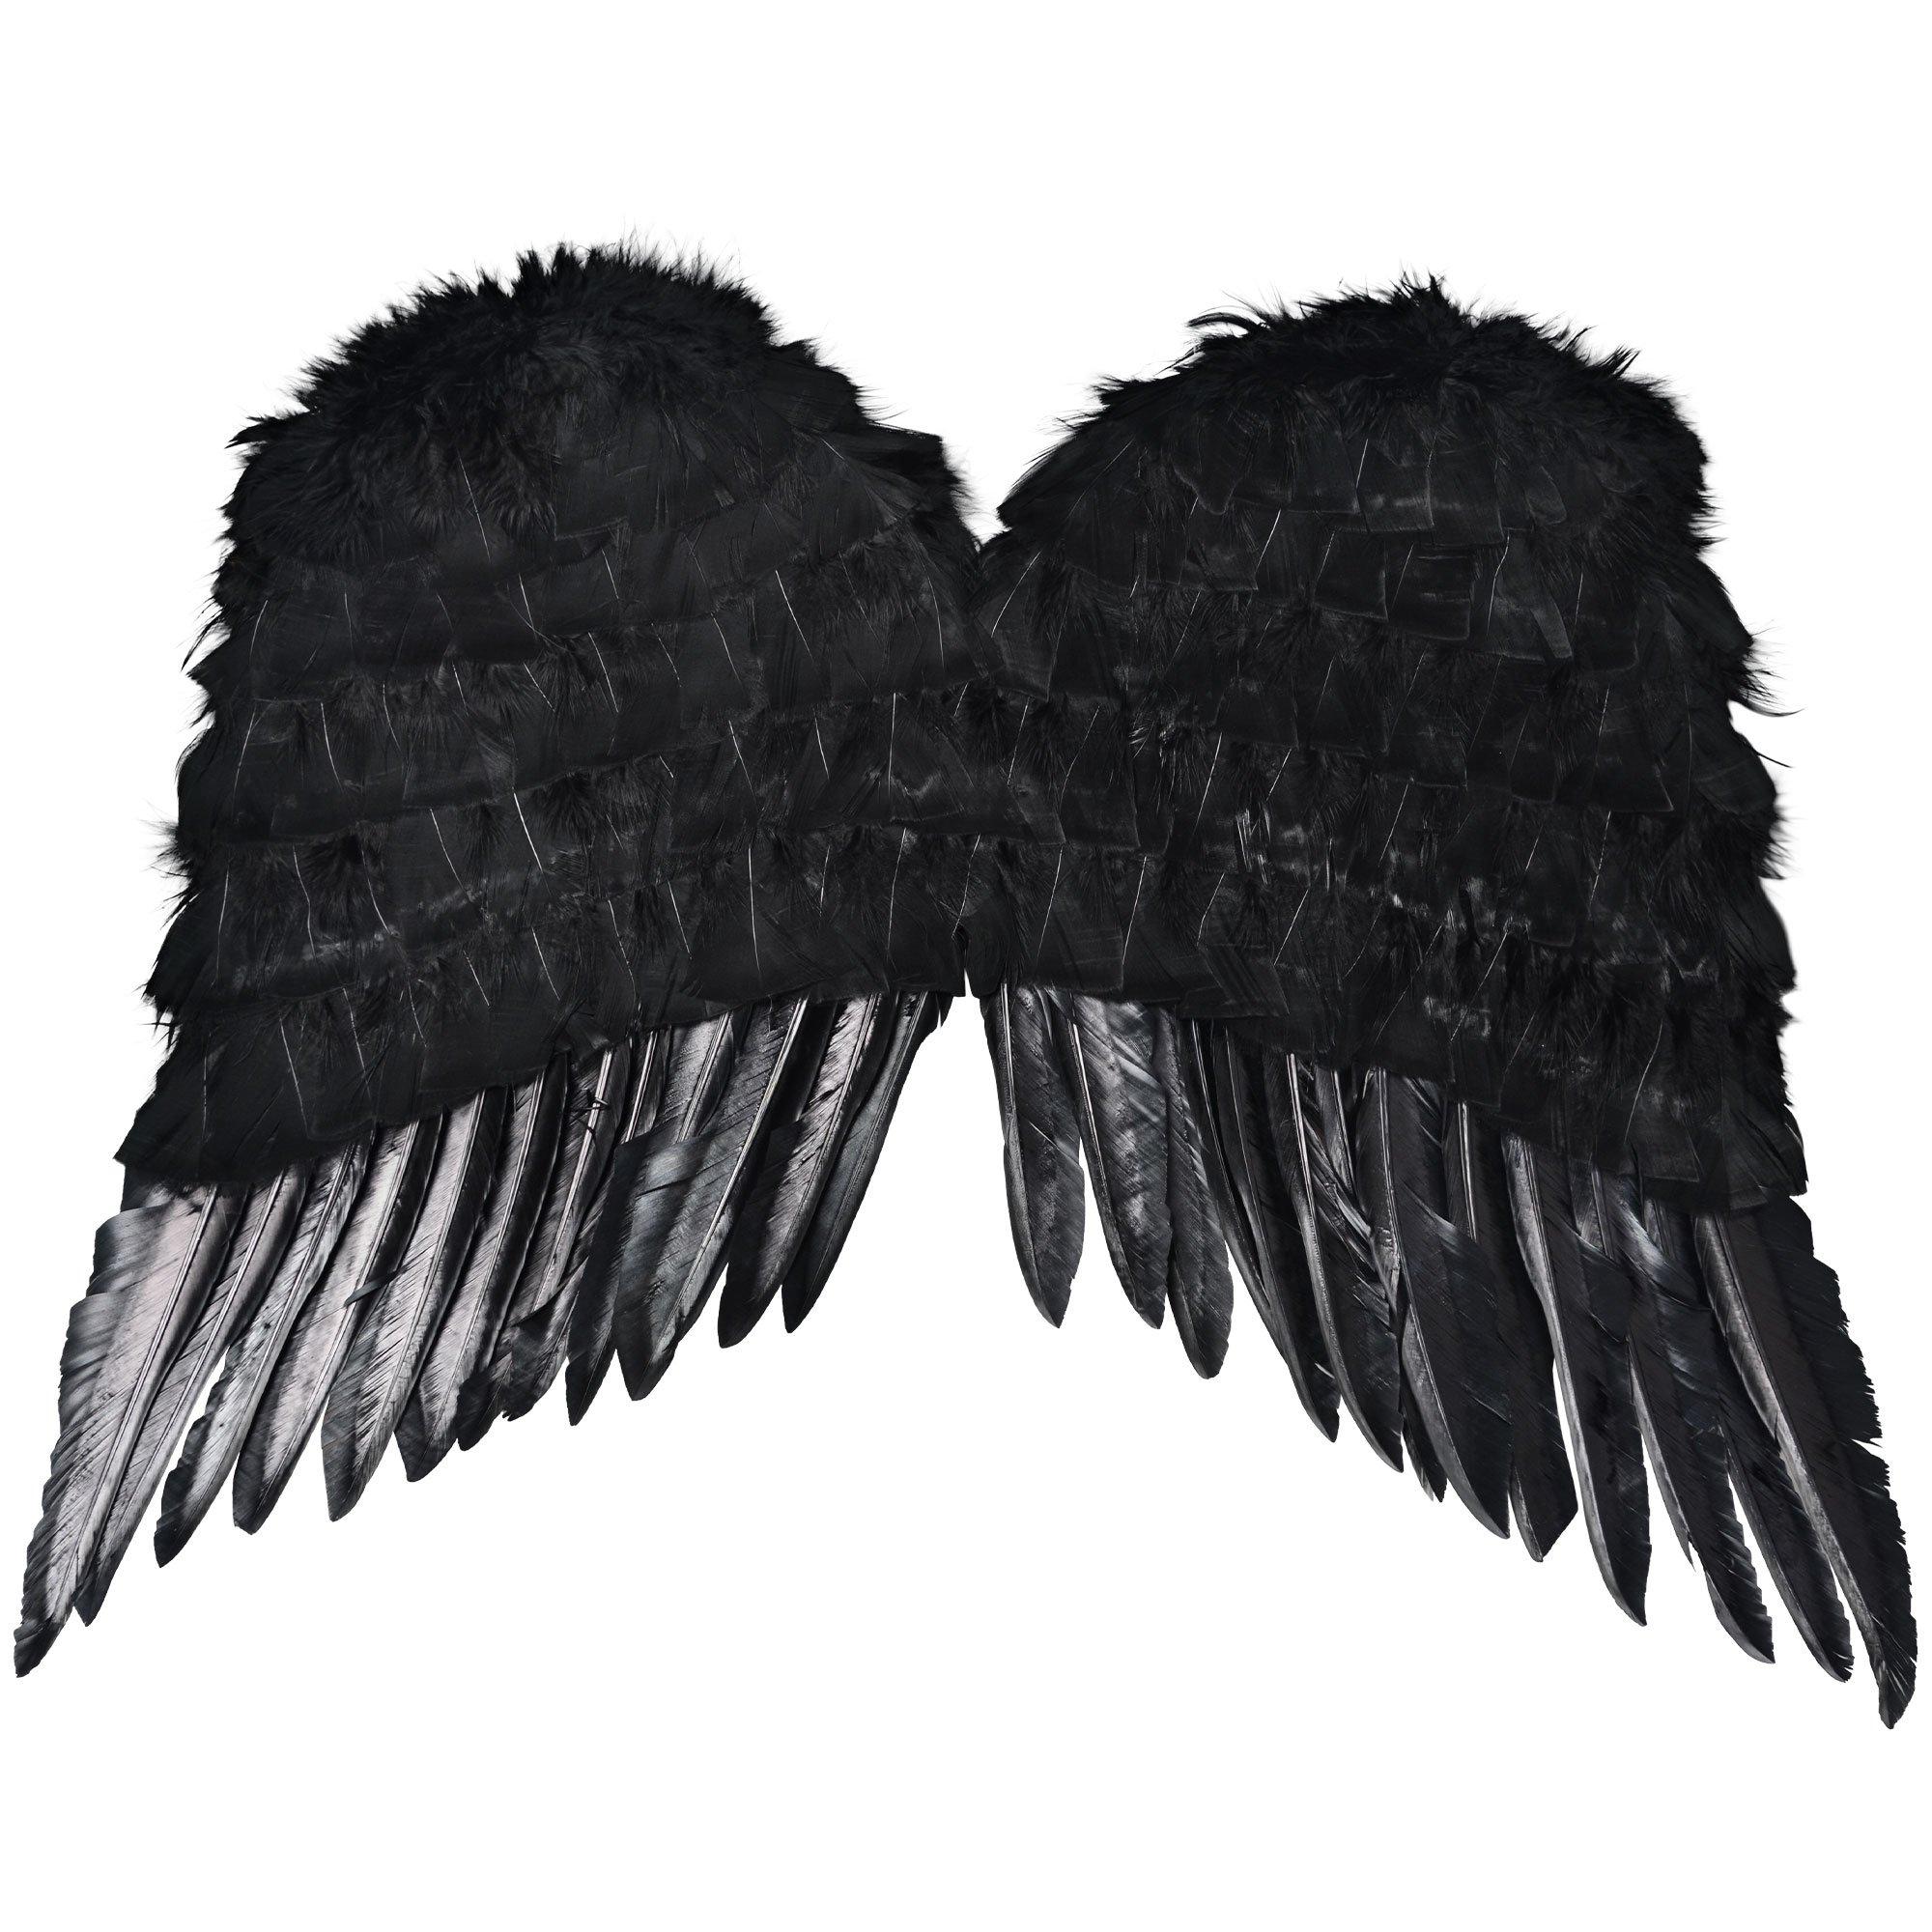 What are Black Winged Angels? - Inner Insights